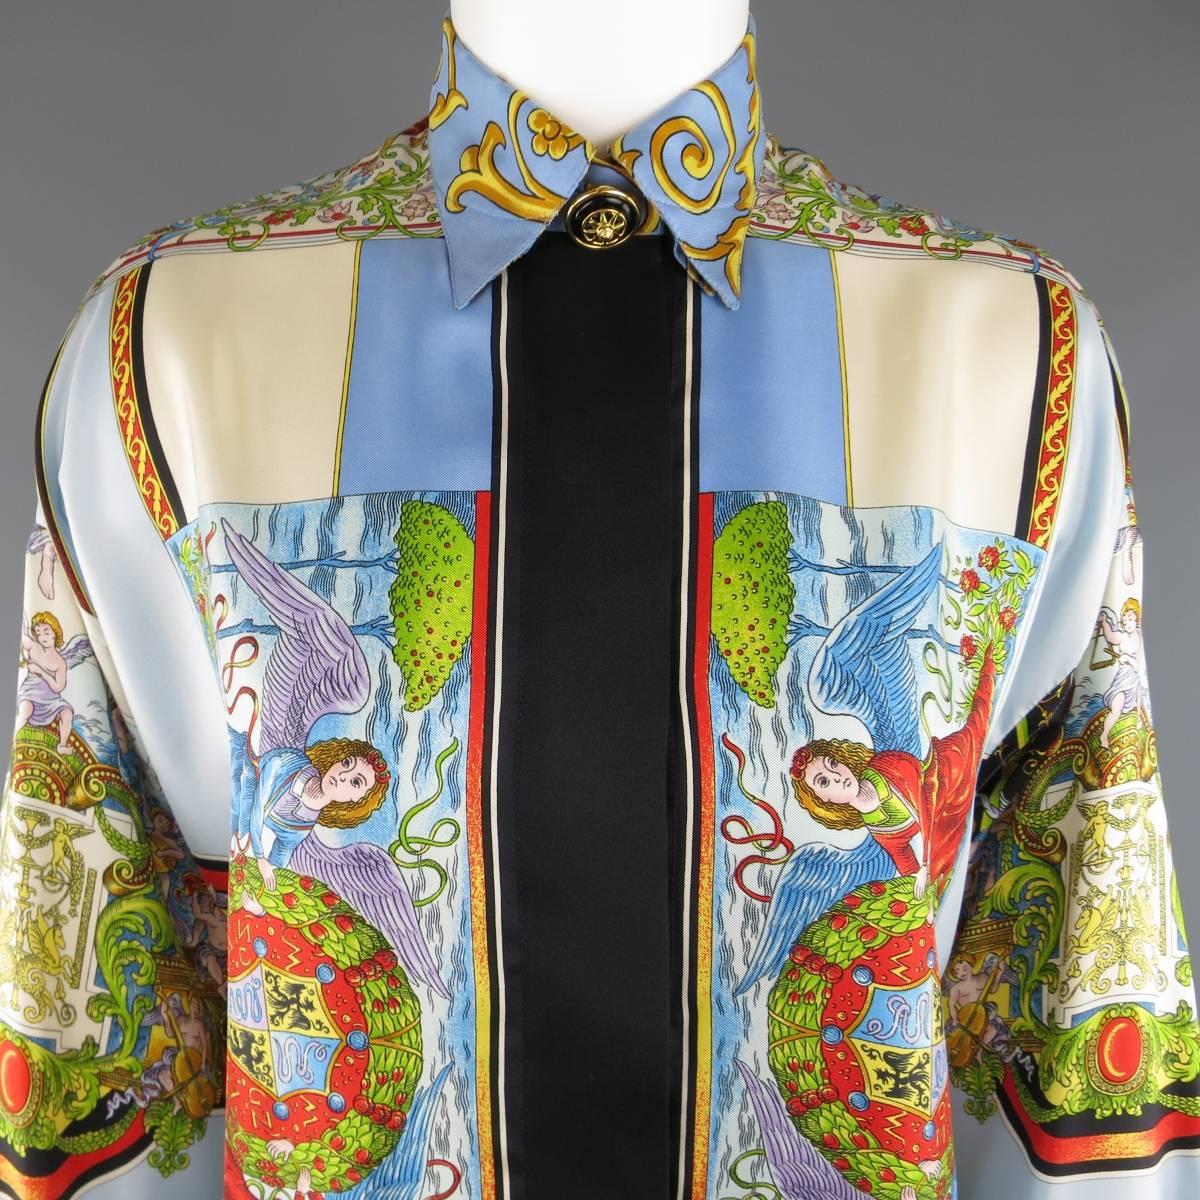 Vintage 1990's GIANNI VERSACE Couture blouse comes in a light sky blue silk twill with all over multicolor angels and crests print featuring a pointed, boroque print collar, hidden placket button up closure, and French cuffs with black and gold tone